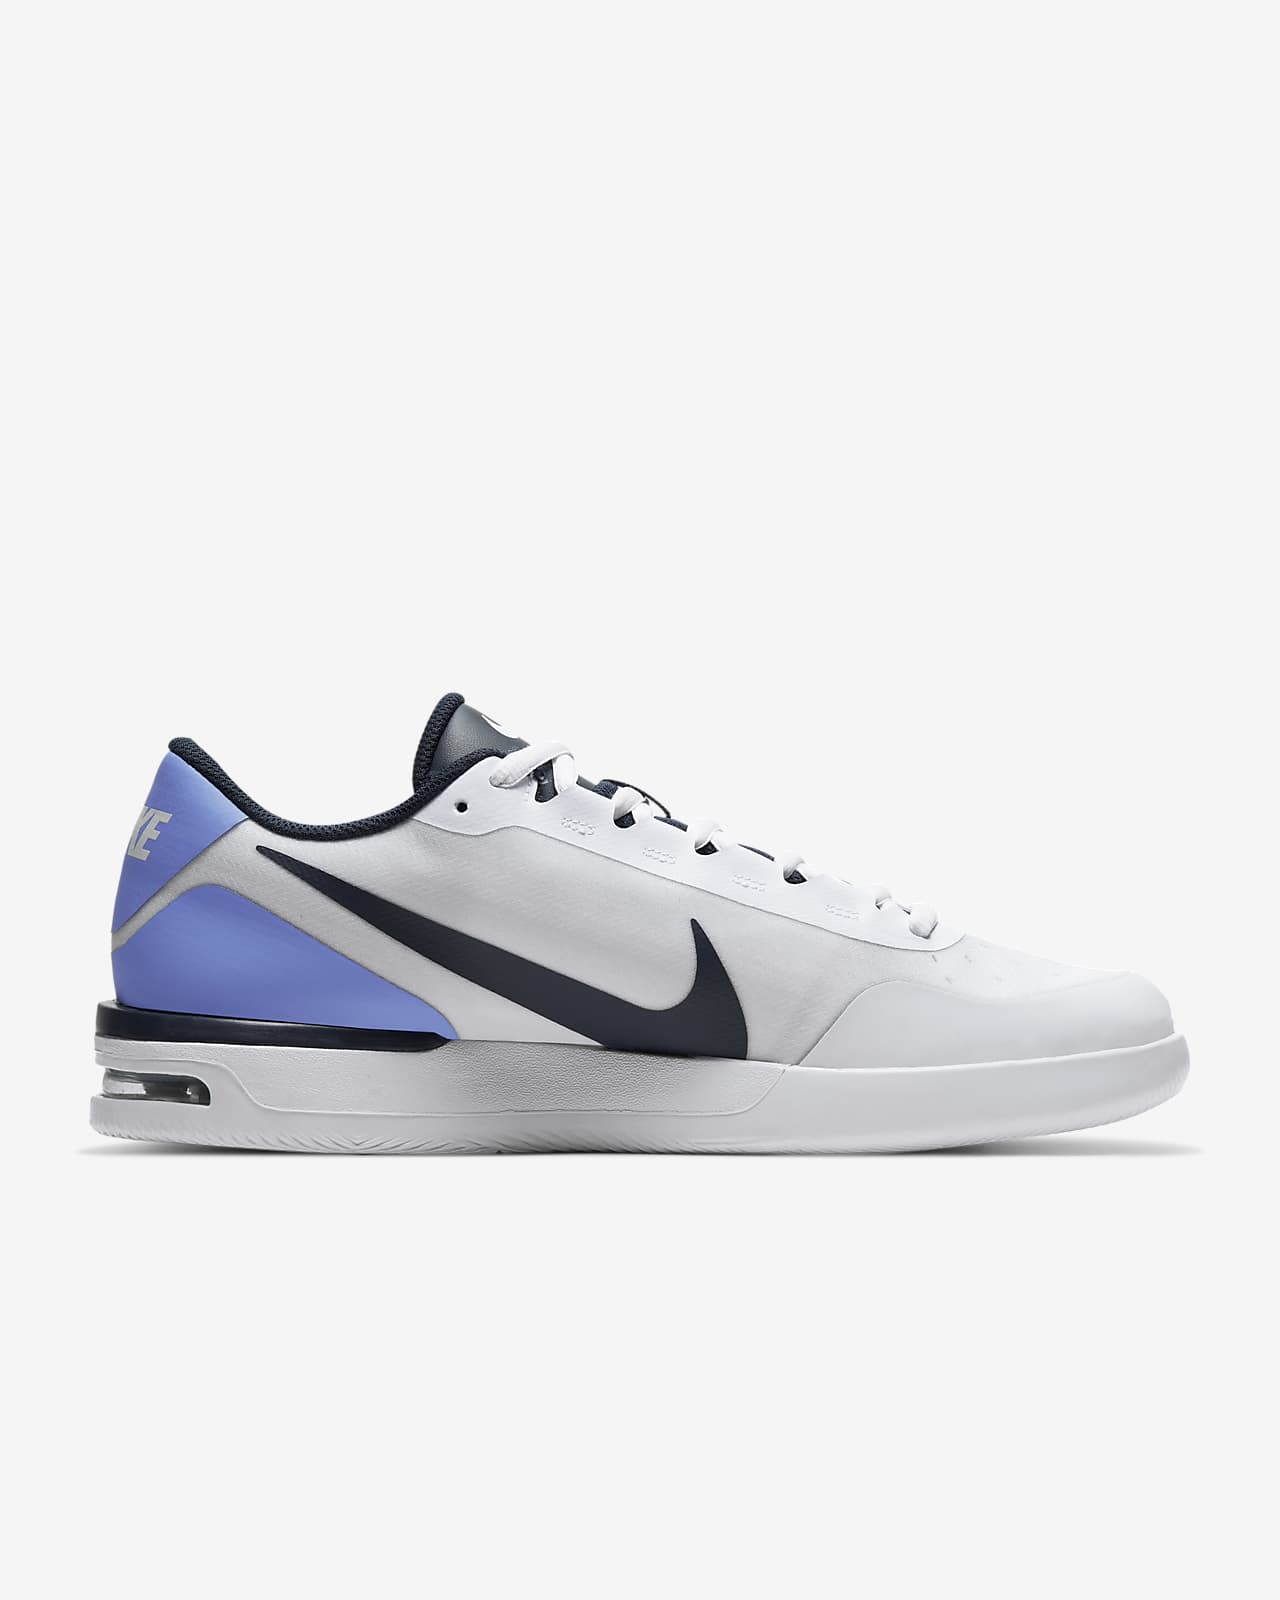 nikecourt air max vapor wing ms review